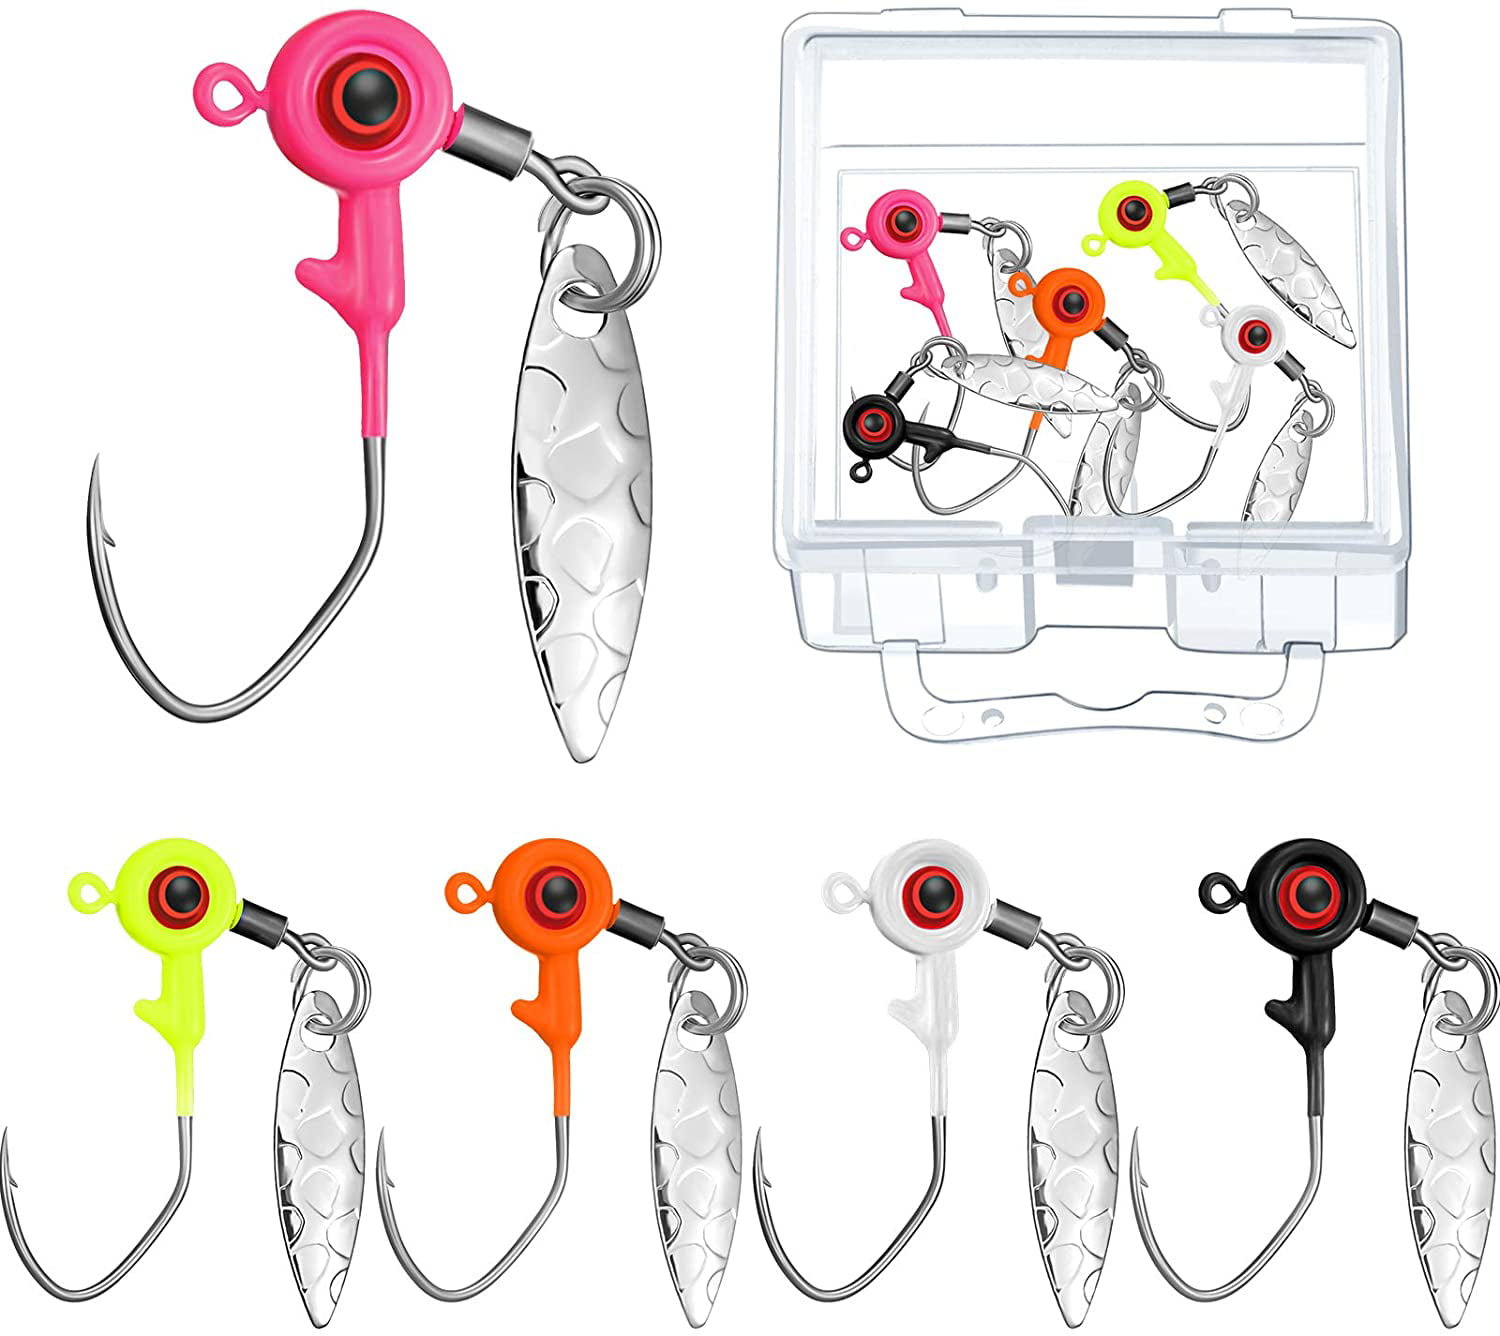 1/ 16 oz Fishing Jig Heads Kit Fishing Water Hooks Fishing Hook Lure Jigs Fishing Accessories and Plastic Box for Bass and Crappie